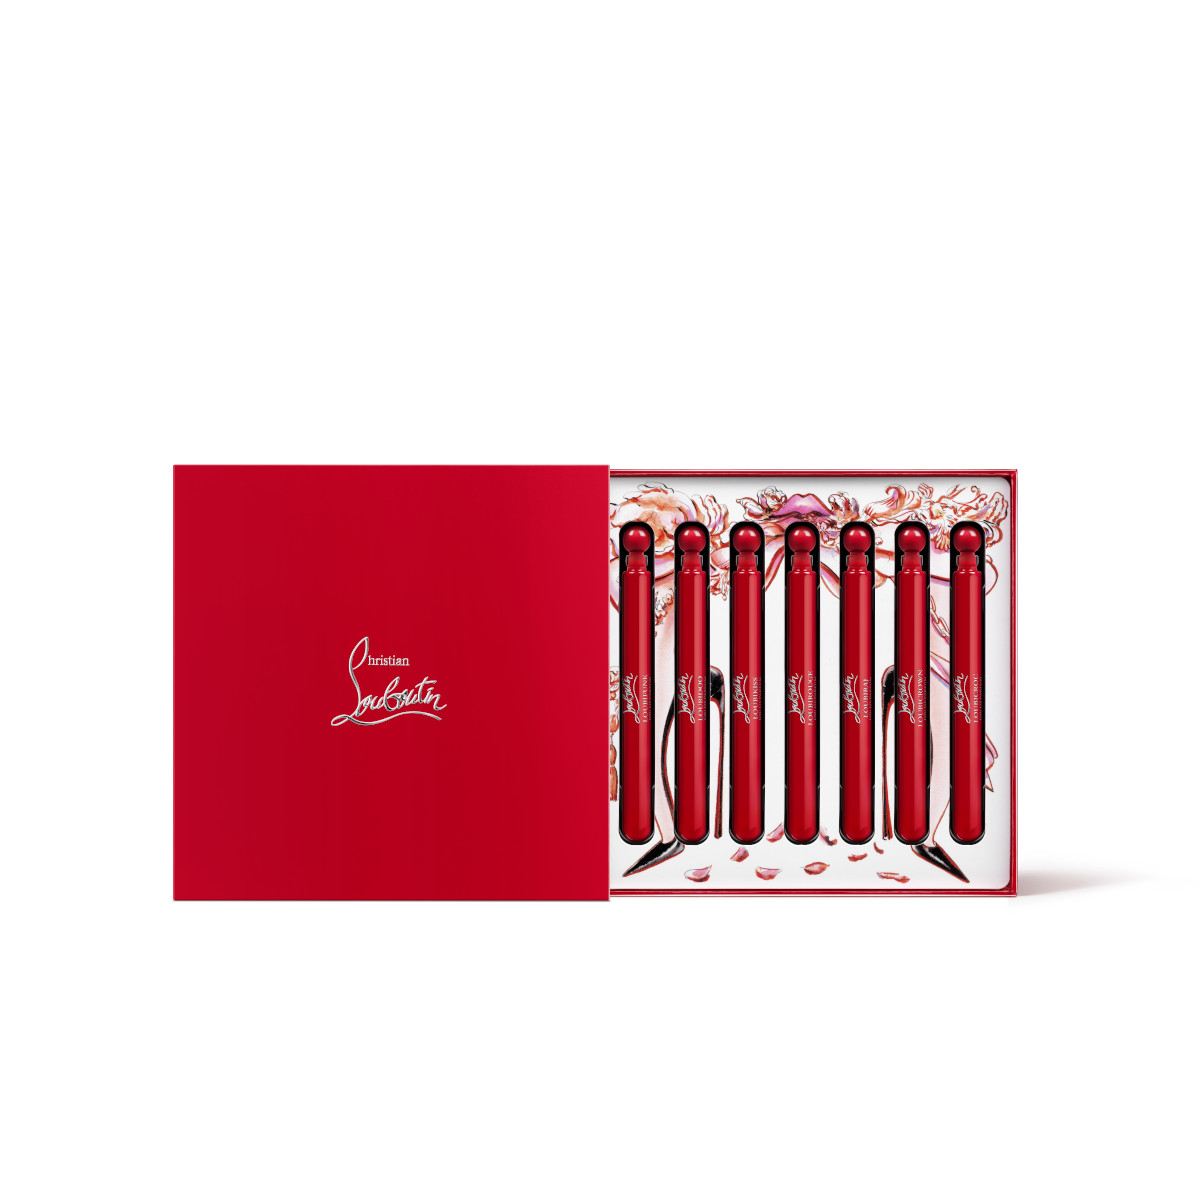 Christian Louboutin adds to Loubiworld fragrance collection